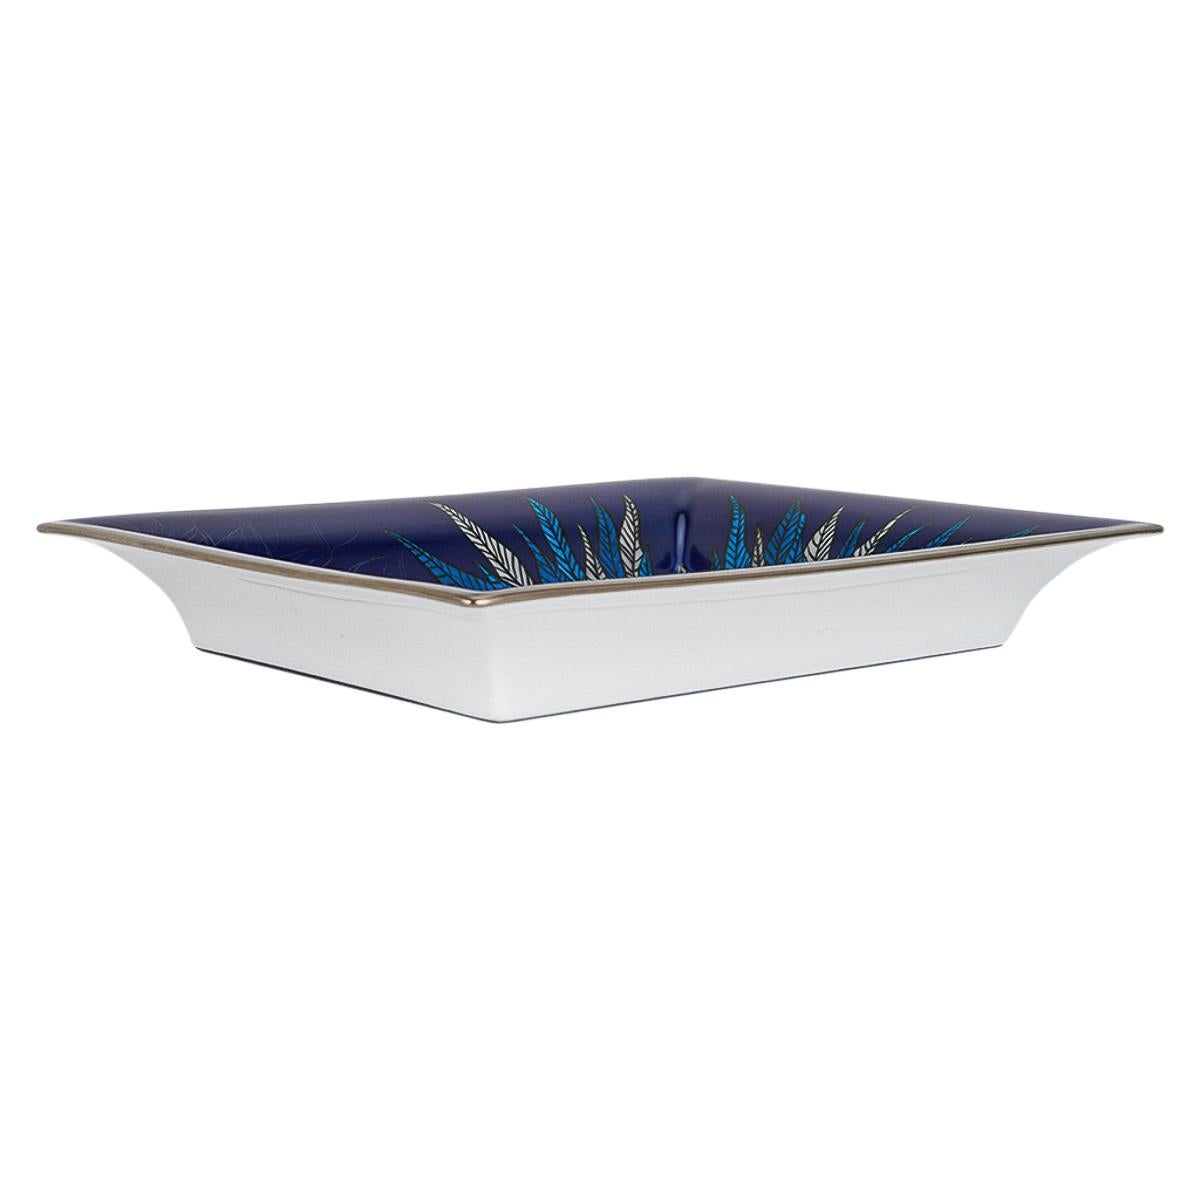 Hermes Panthere Aura Bleu Nuit Hand Painted Change Tray Porcelain For Sale 2